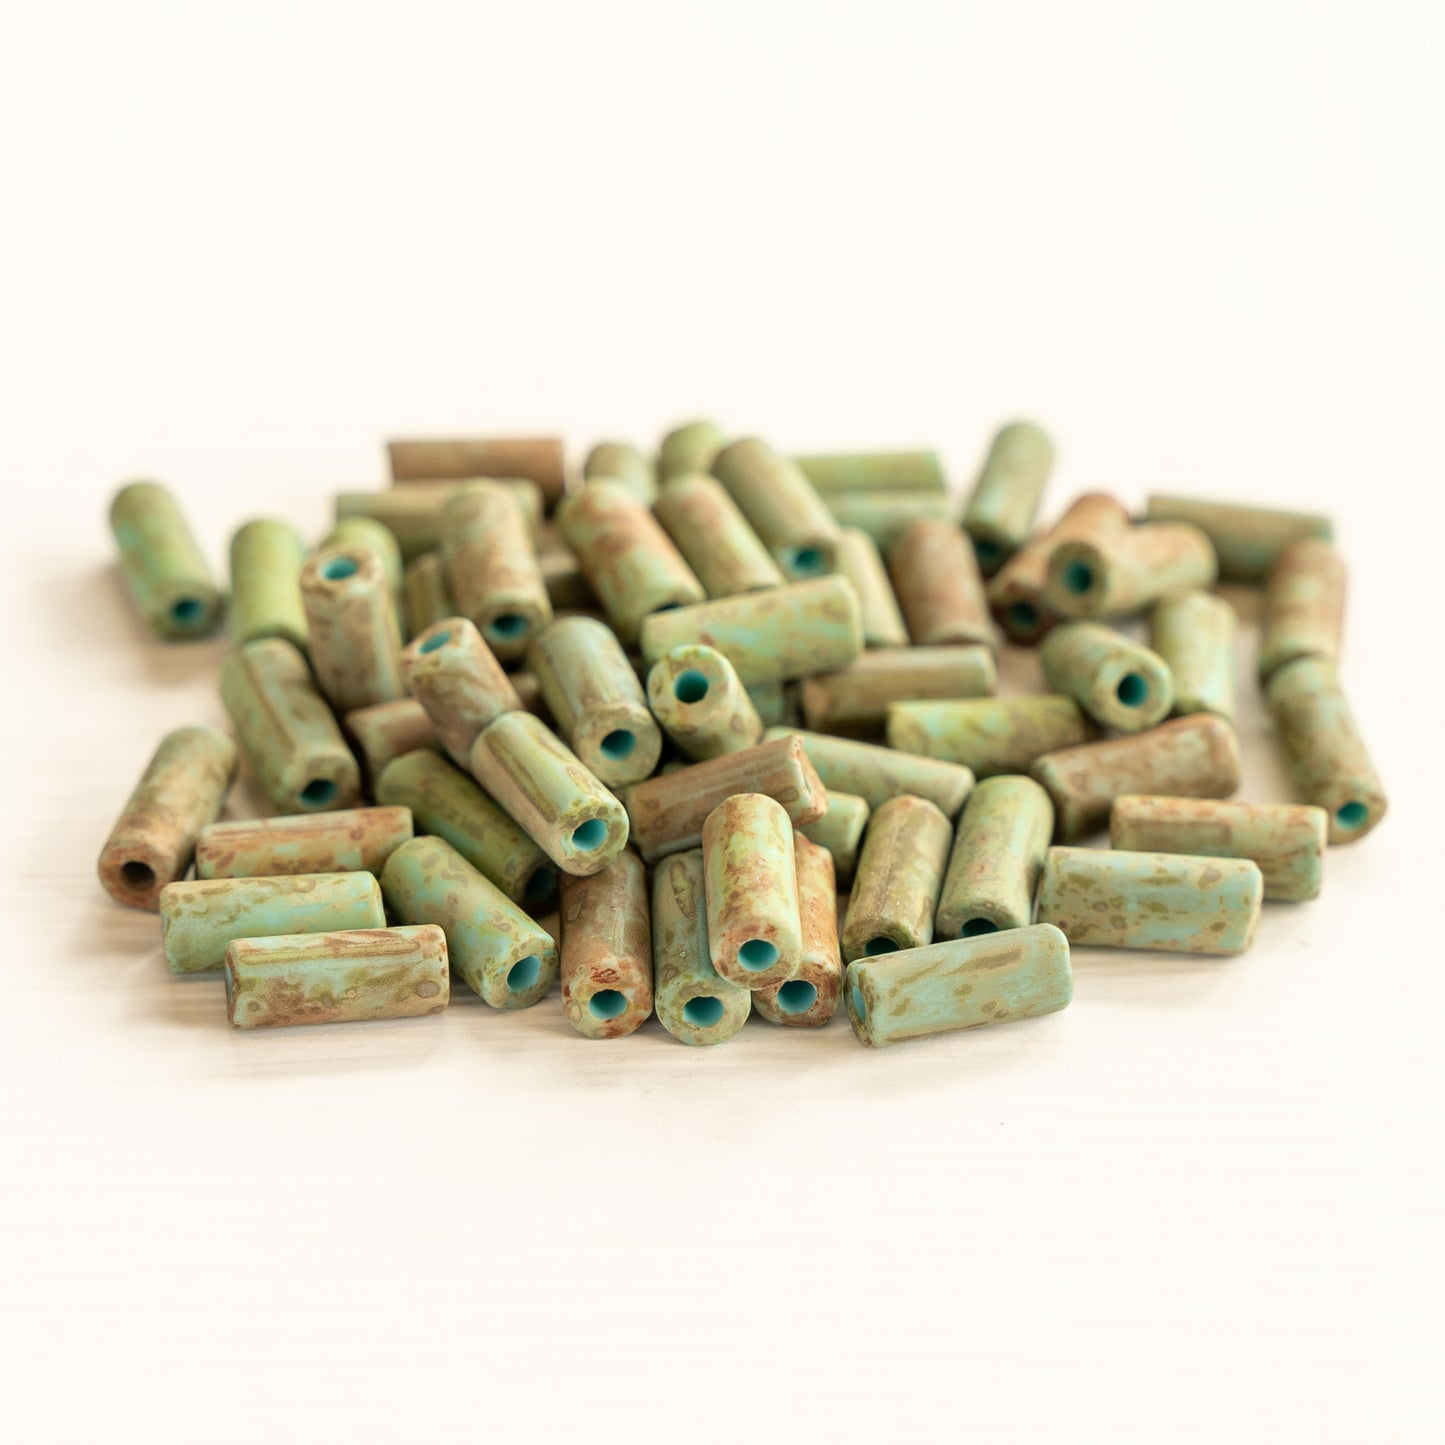 9x4mm Glass Tube Beads - Matte Green Turquoise Picasso - 20 or 60 Inches